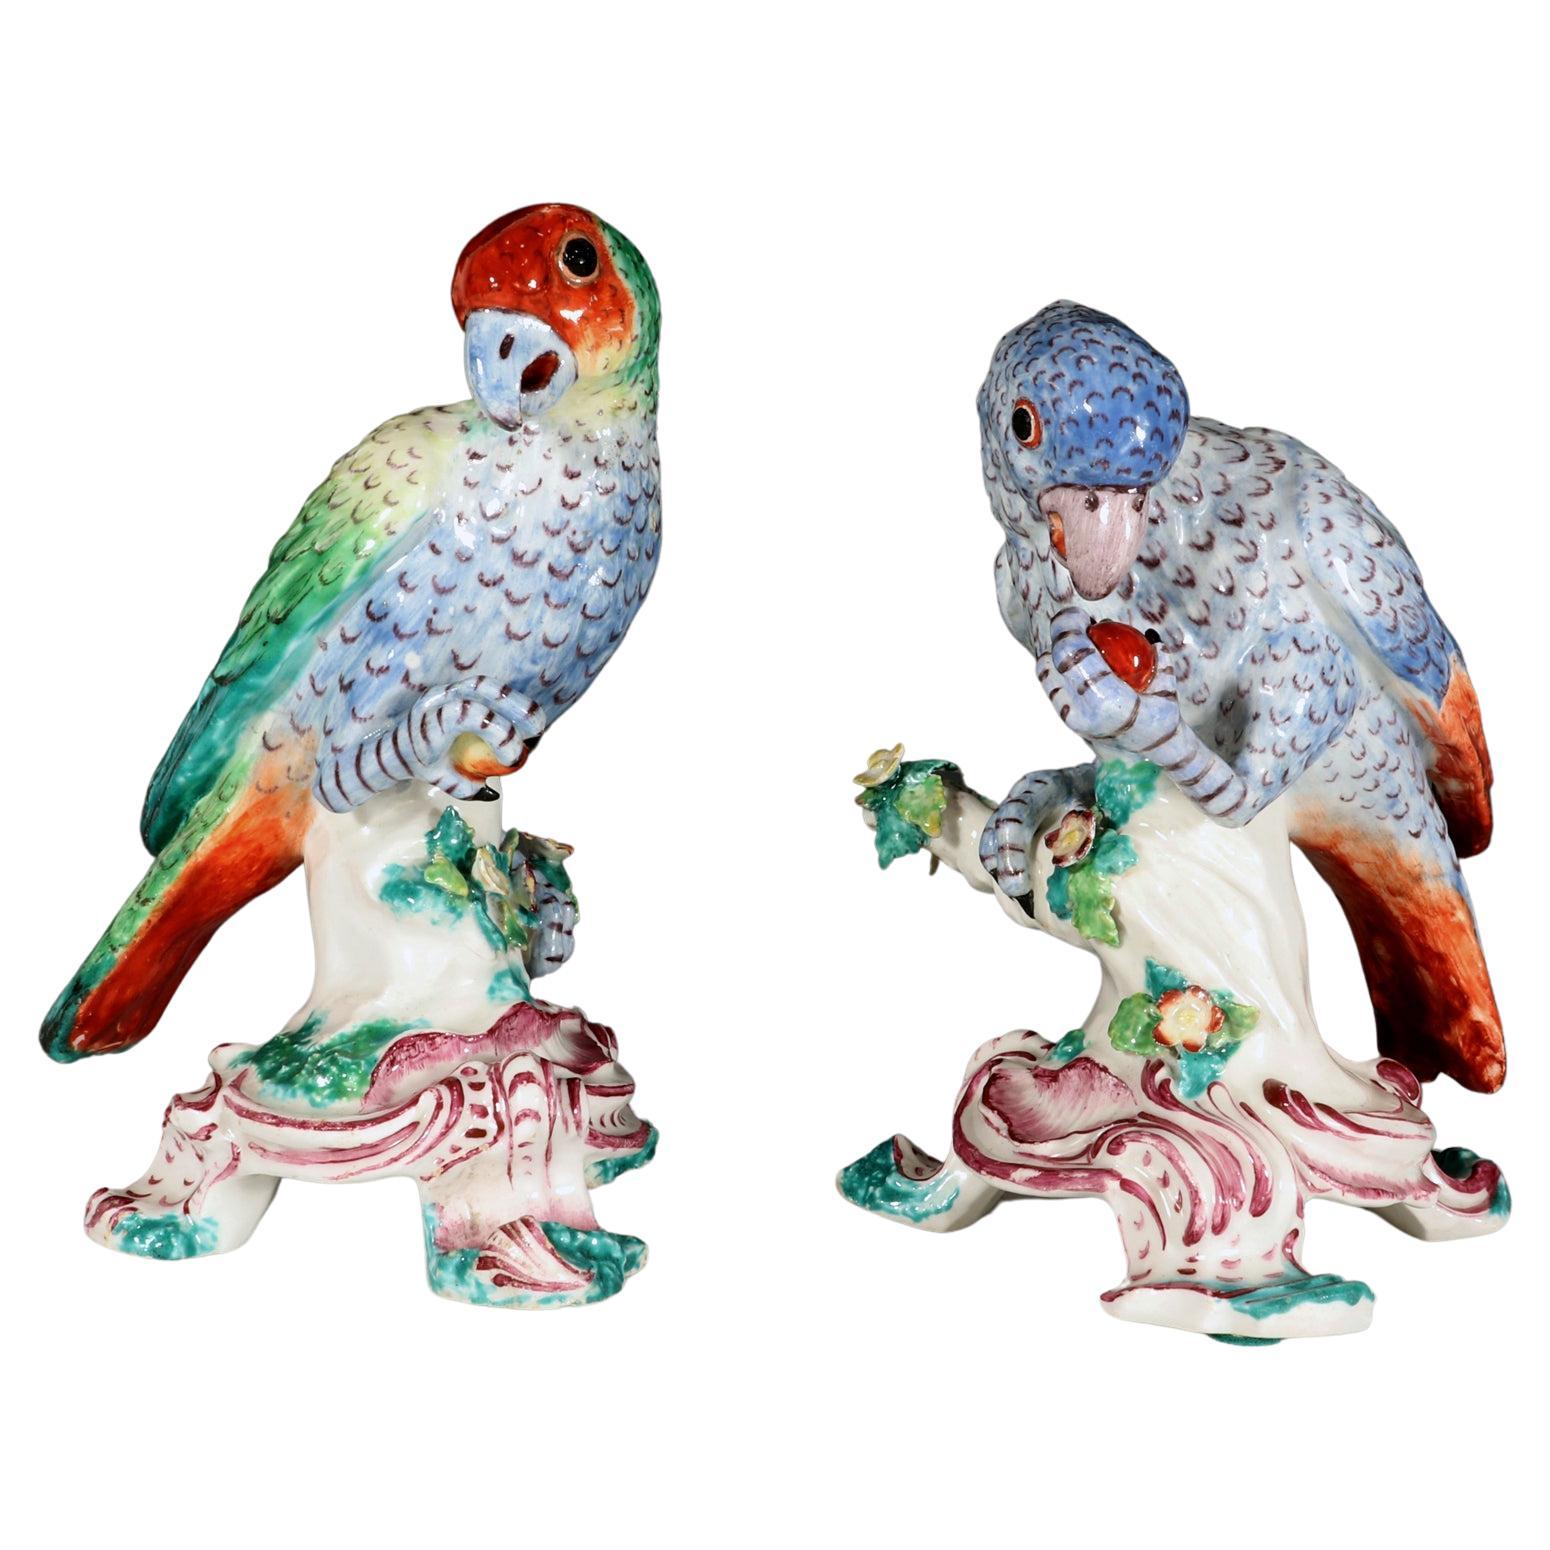 Rare 18th-Century Bow Porcelain Figures of South American Parrots For Sale